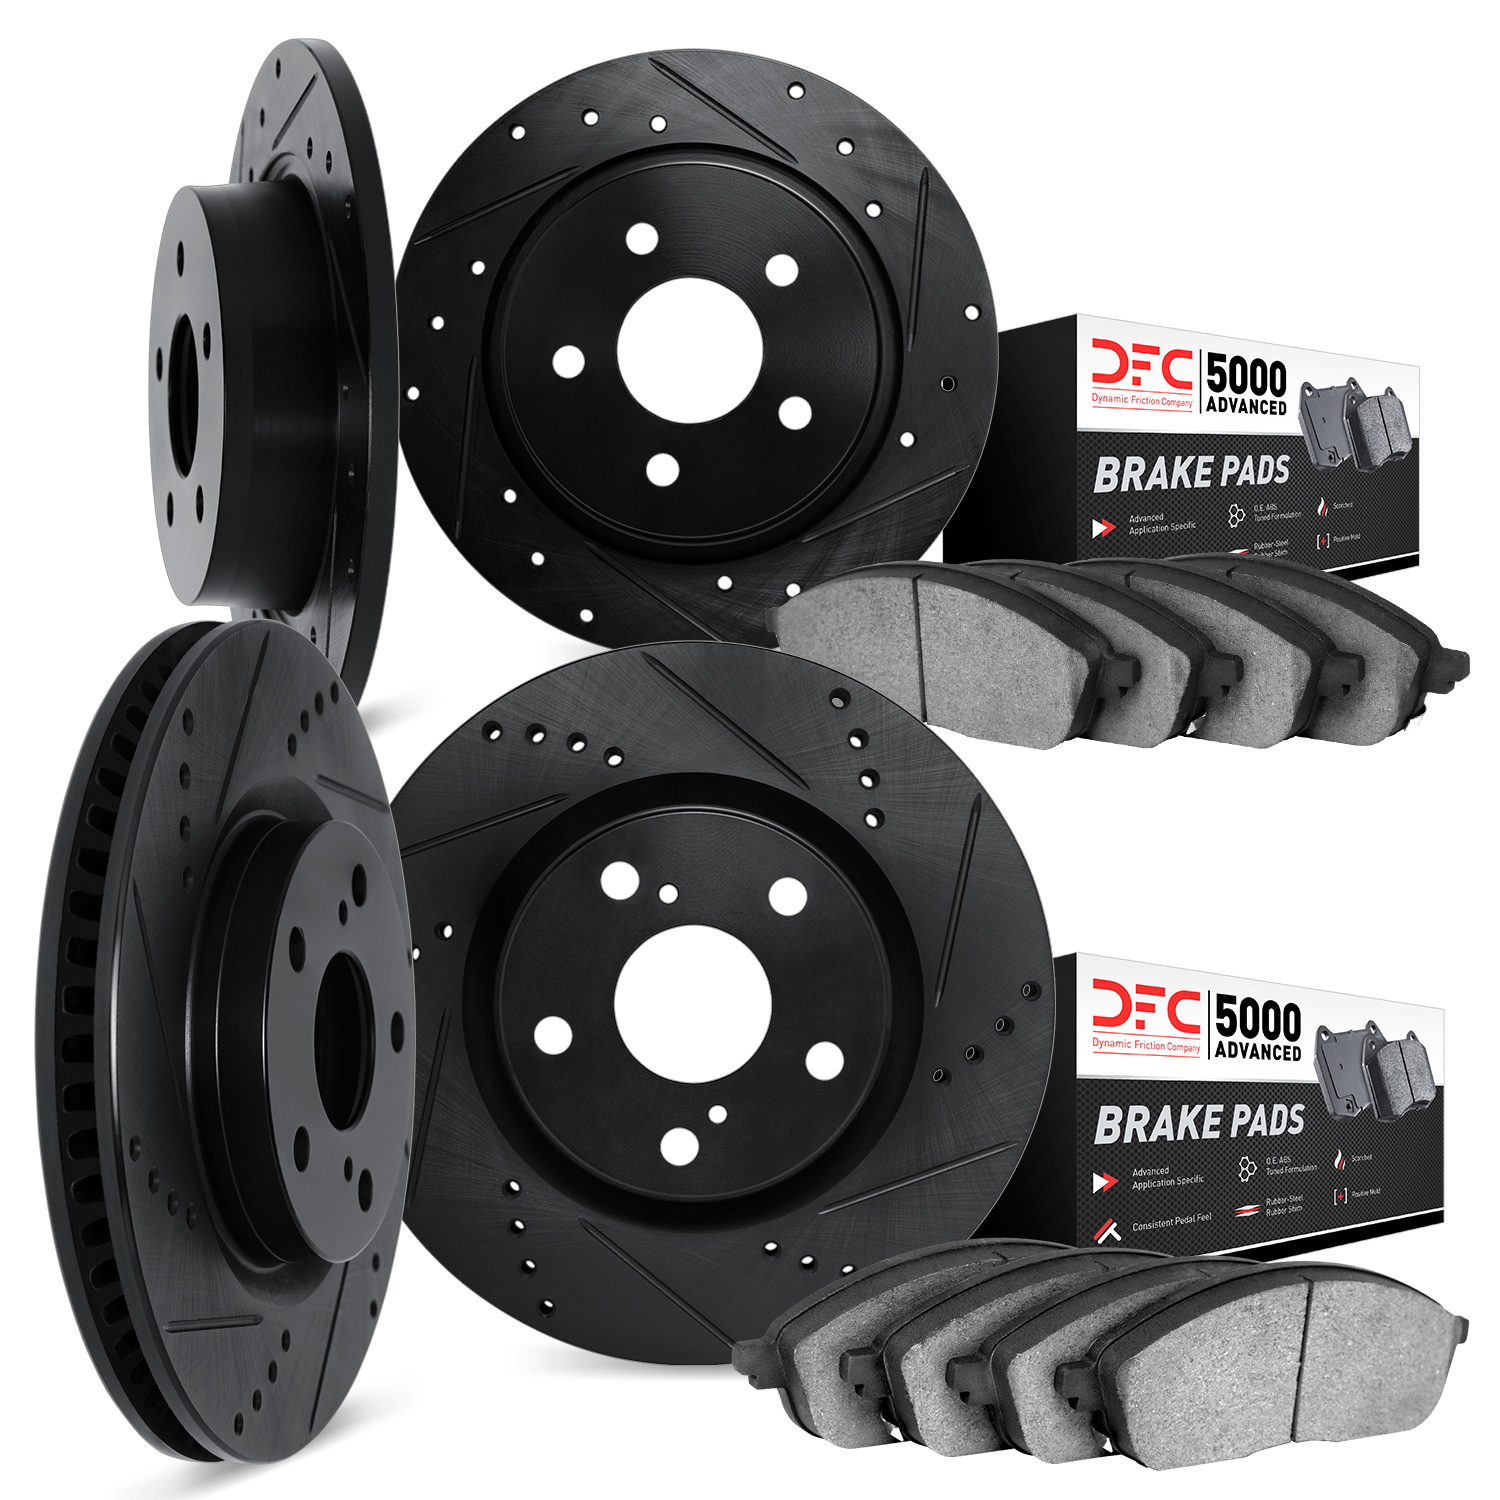 8504-76137 Drilled/Slotted Brake Rotors w/5000 Advanced Brake Pads Kit [Black], 2002-2006 Lexus/Toyota/Scion, Position: Front an